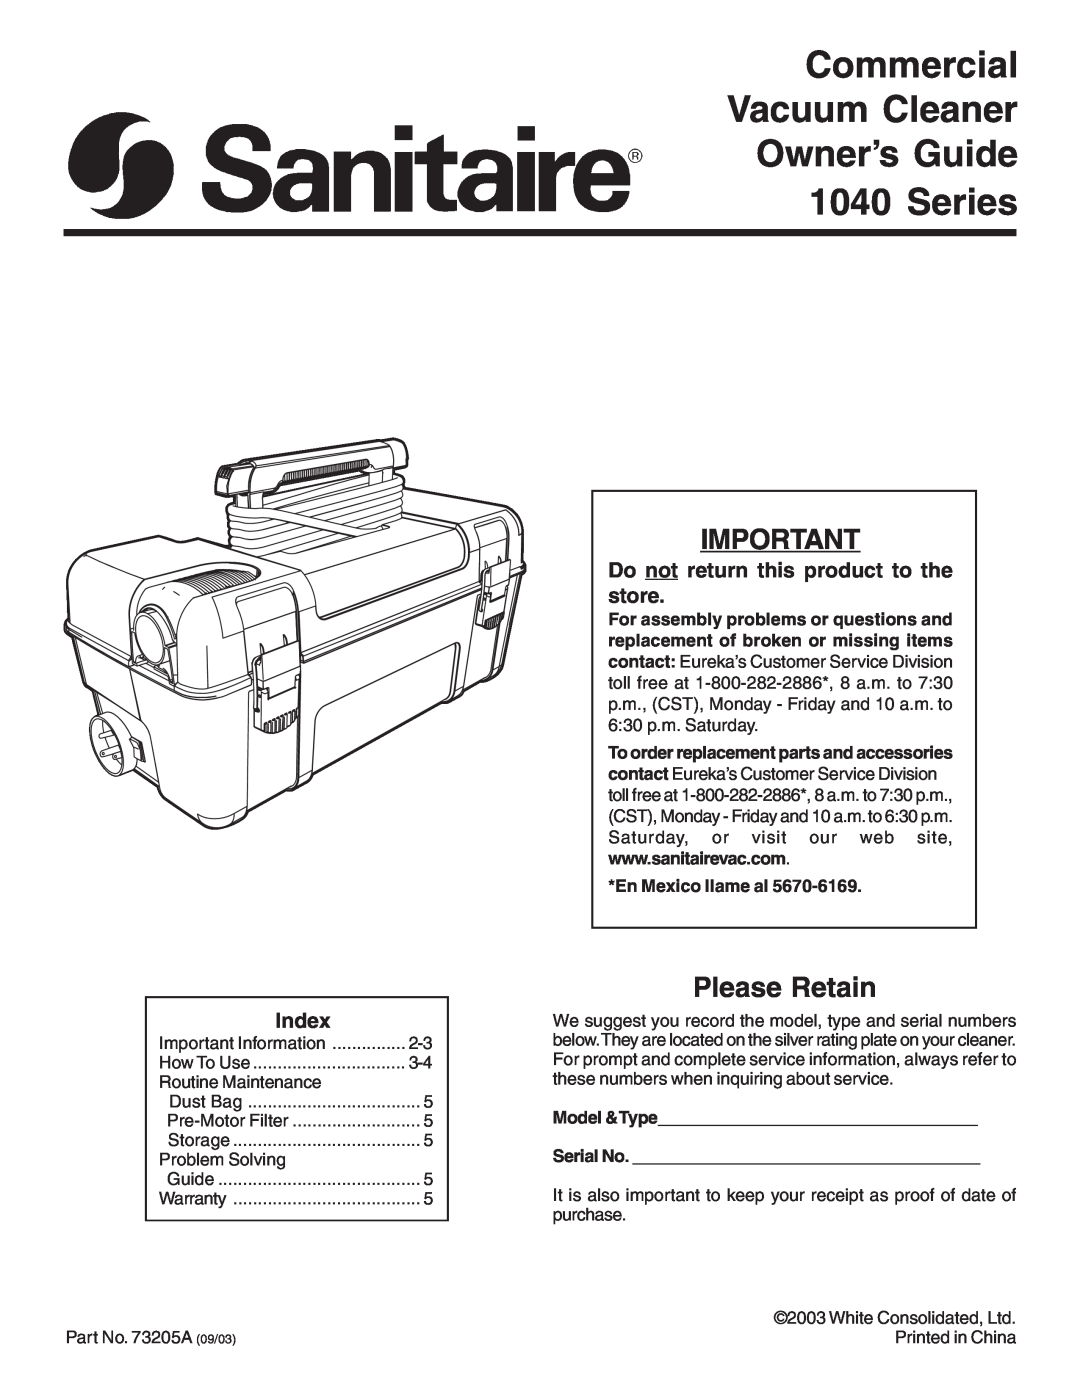 Sanitaire 1040 warranty Do notreturn this product to the store, Index, Commercial Vacuum Cleaner Owner’s Guide, Series 